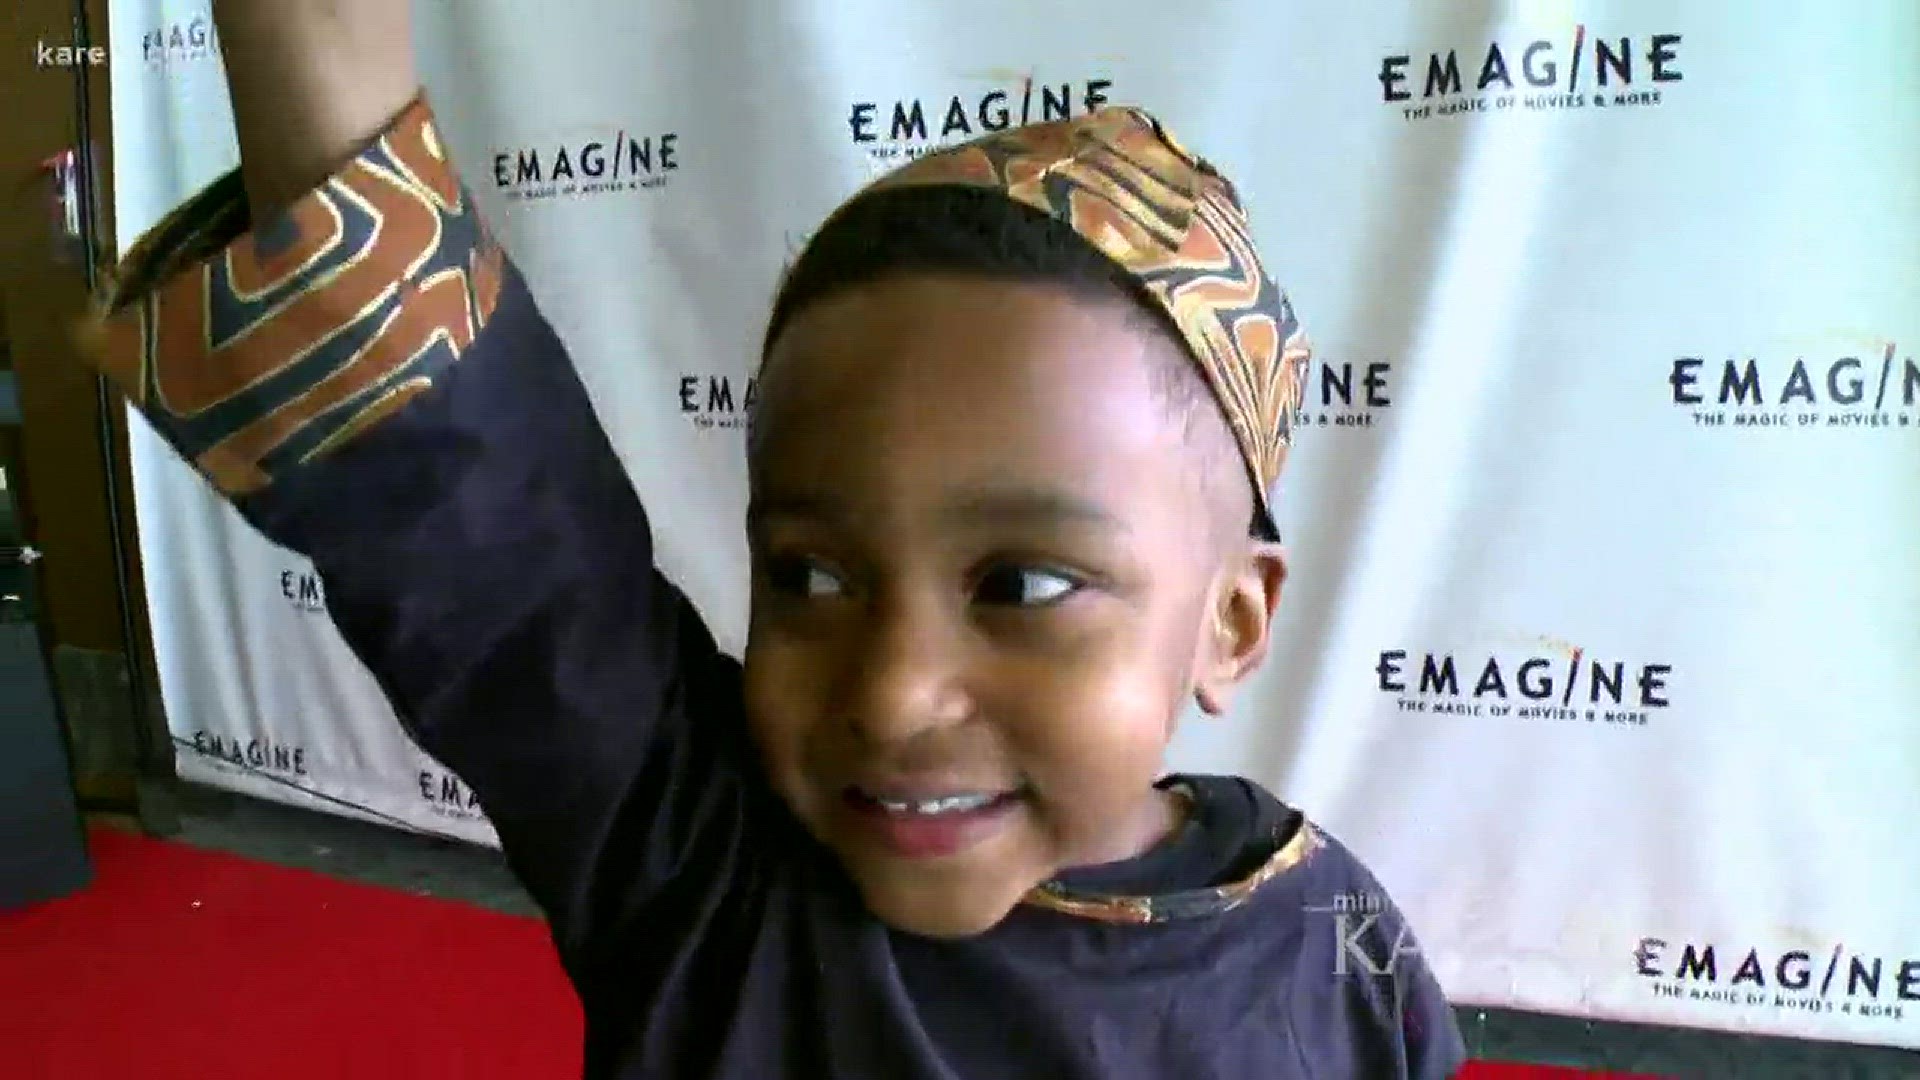 As Black Panther continues to break box office records, special screenings are being held across the nation for kids excited to see a mostly black cast. One of them was in Plymouth on Sunday. http://kare11.tv/2oBP5z5